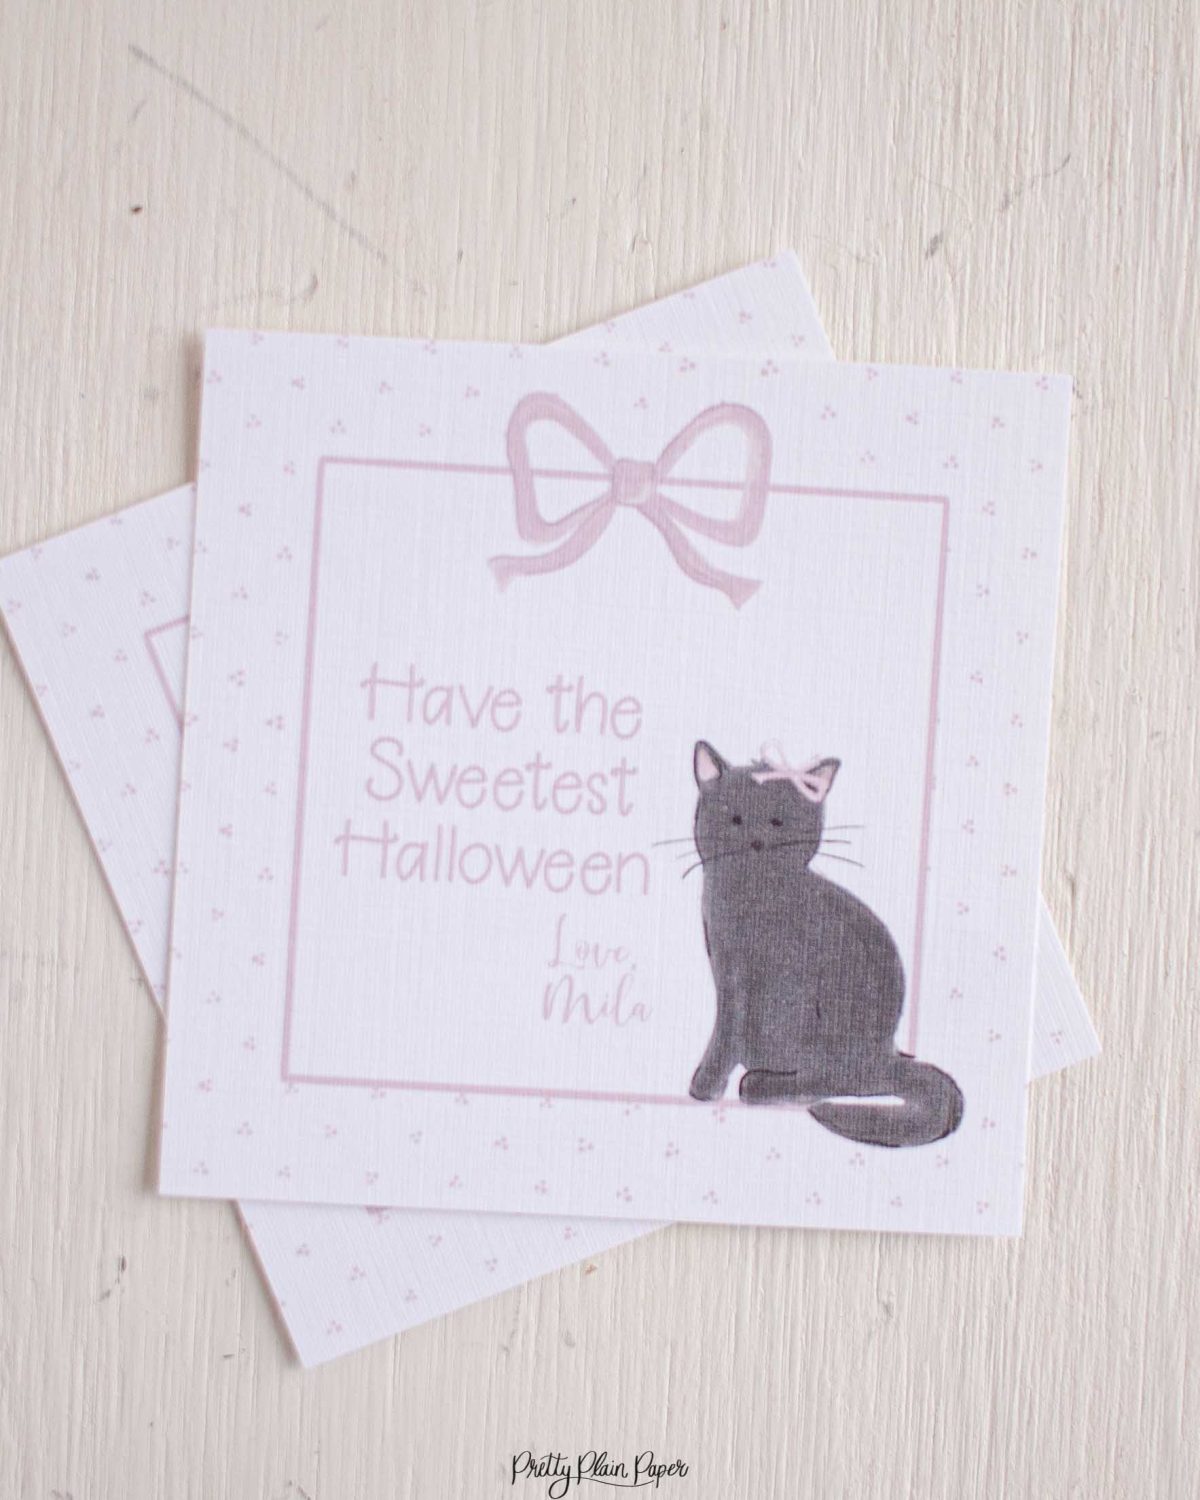 Watercolor Black Cat with Bow Halloween Favor, Treat, Gift Tag by Pretty Plain Paper